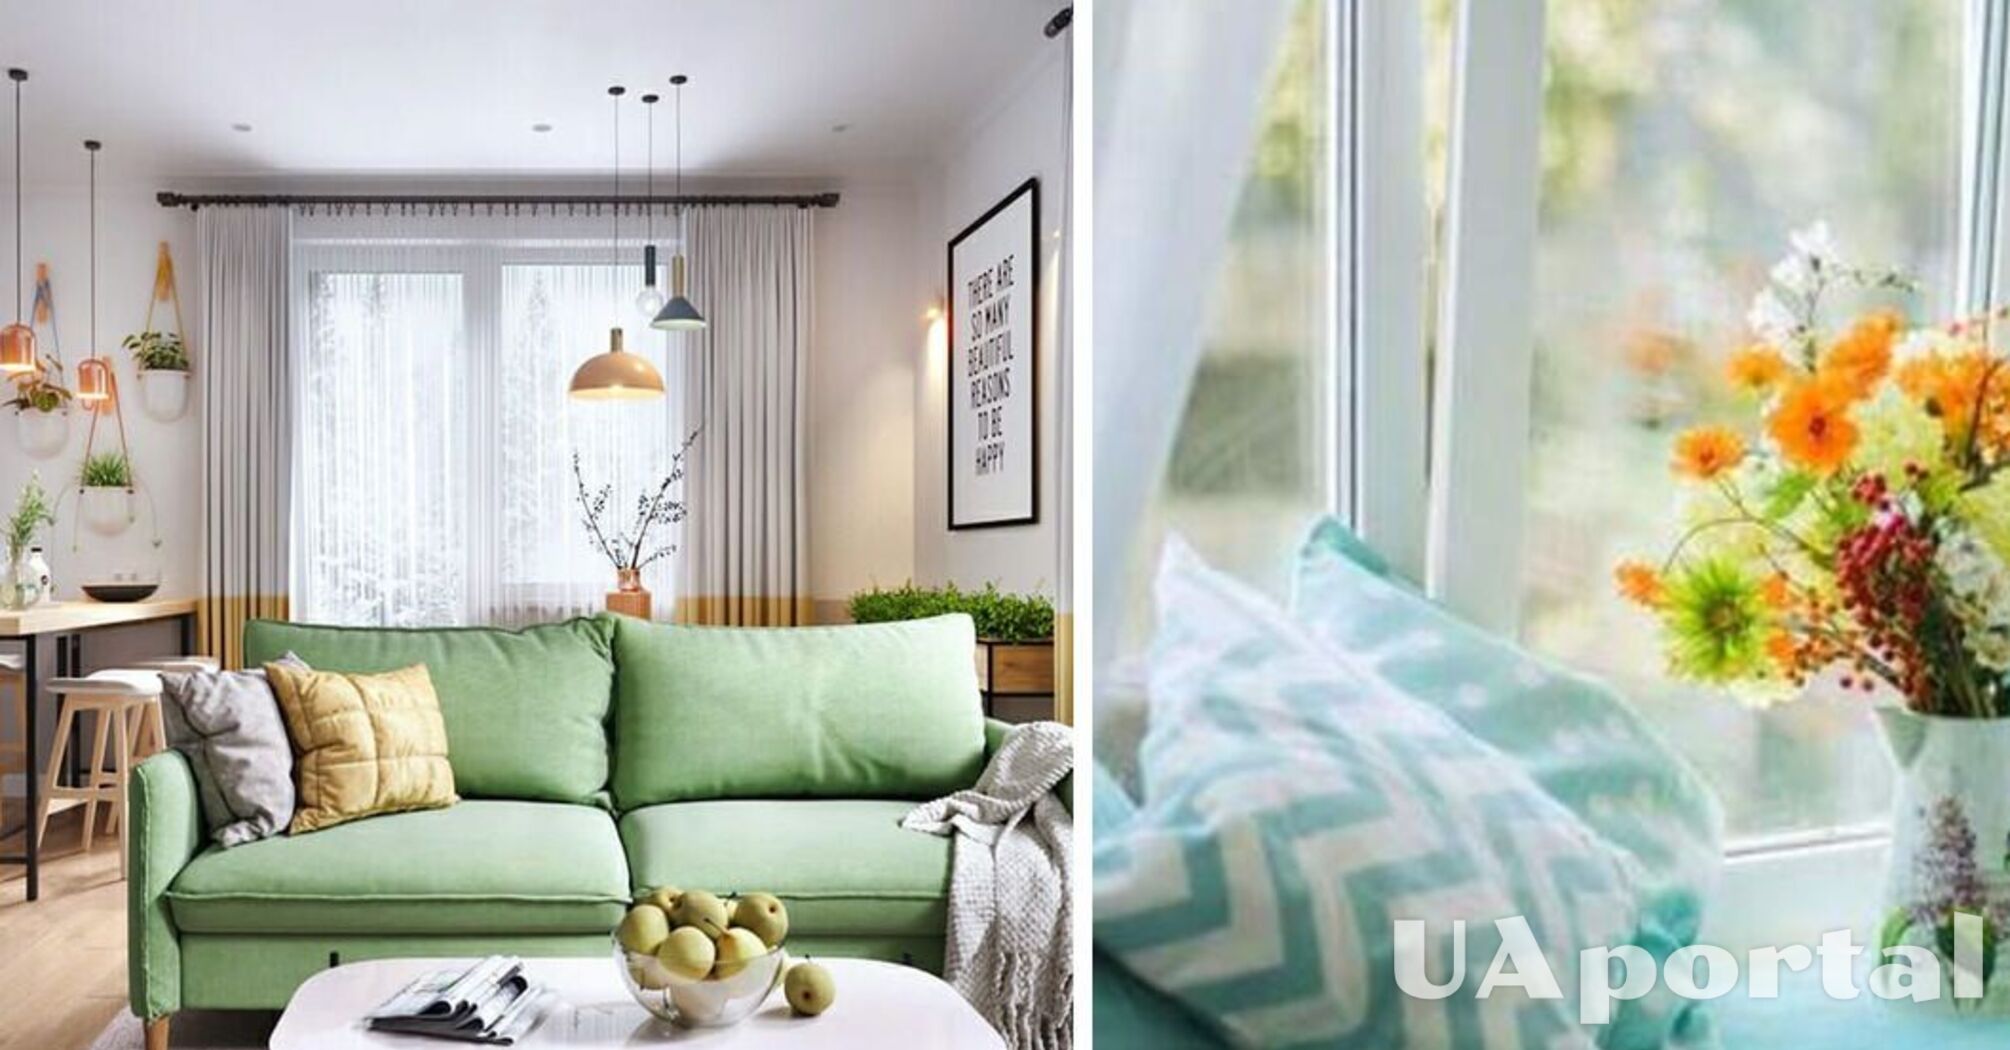 Spring update: how to refresh your home interior after winter